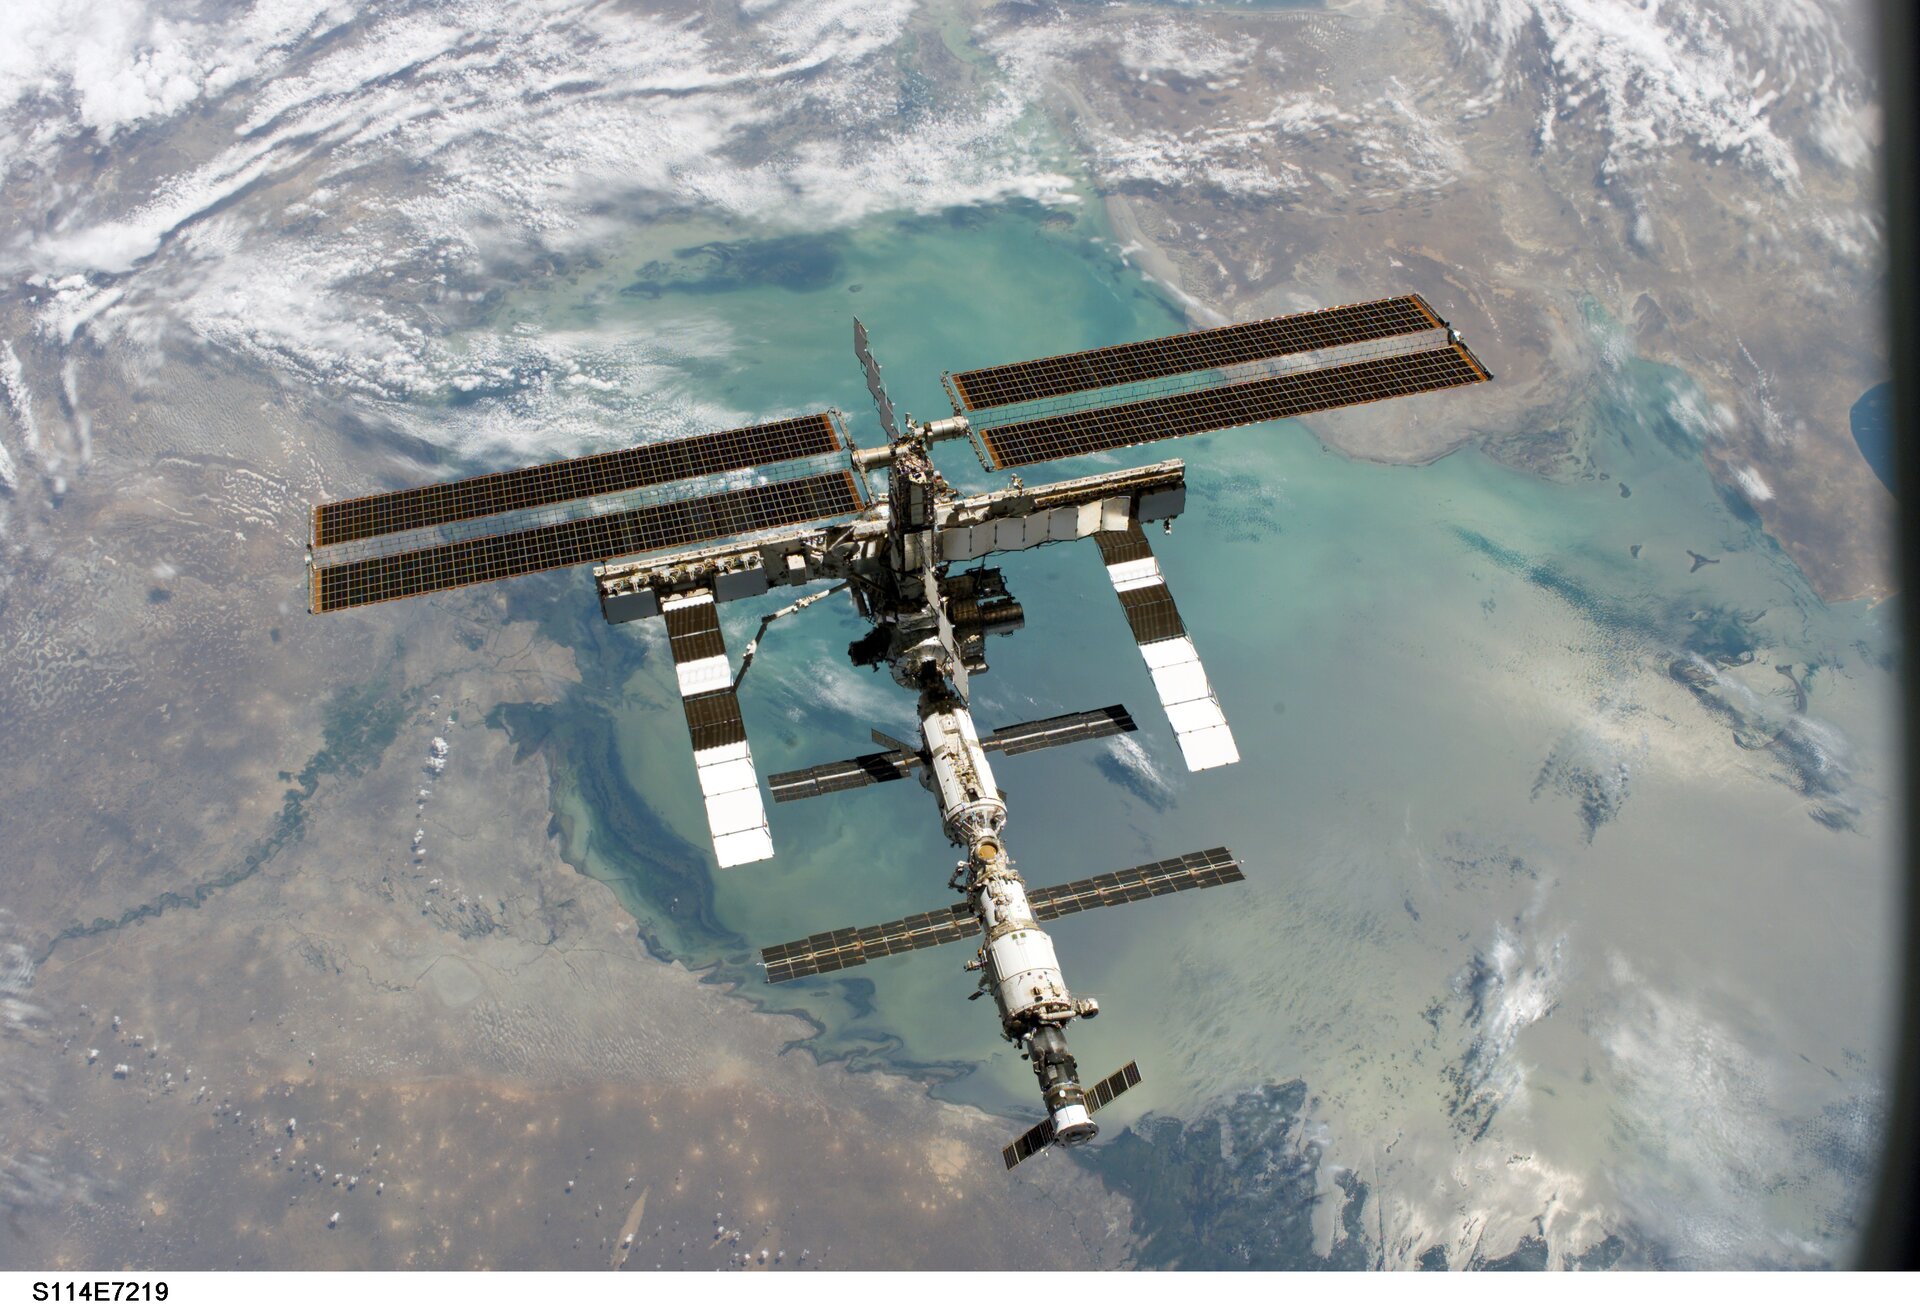 Research access to the International Space Station